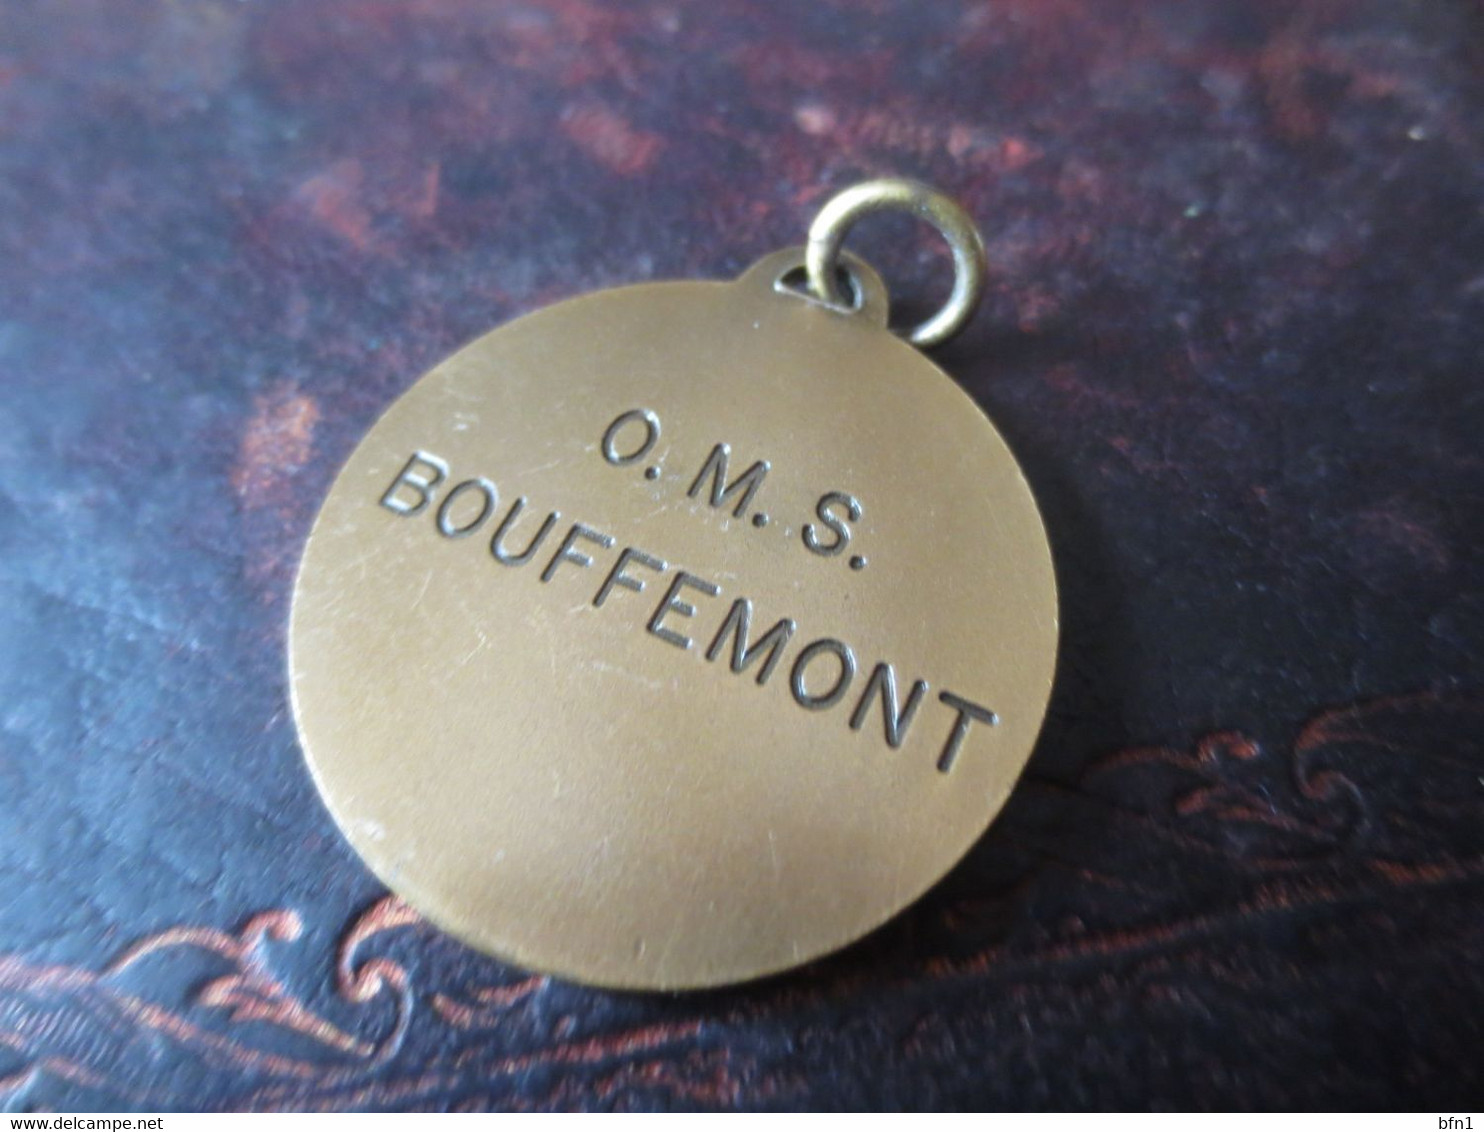 JOLIE MEDAILLON O.M.S. BOUFFEMONT - Professionals/Firms